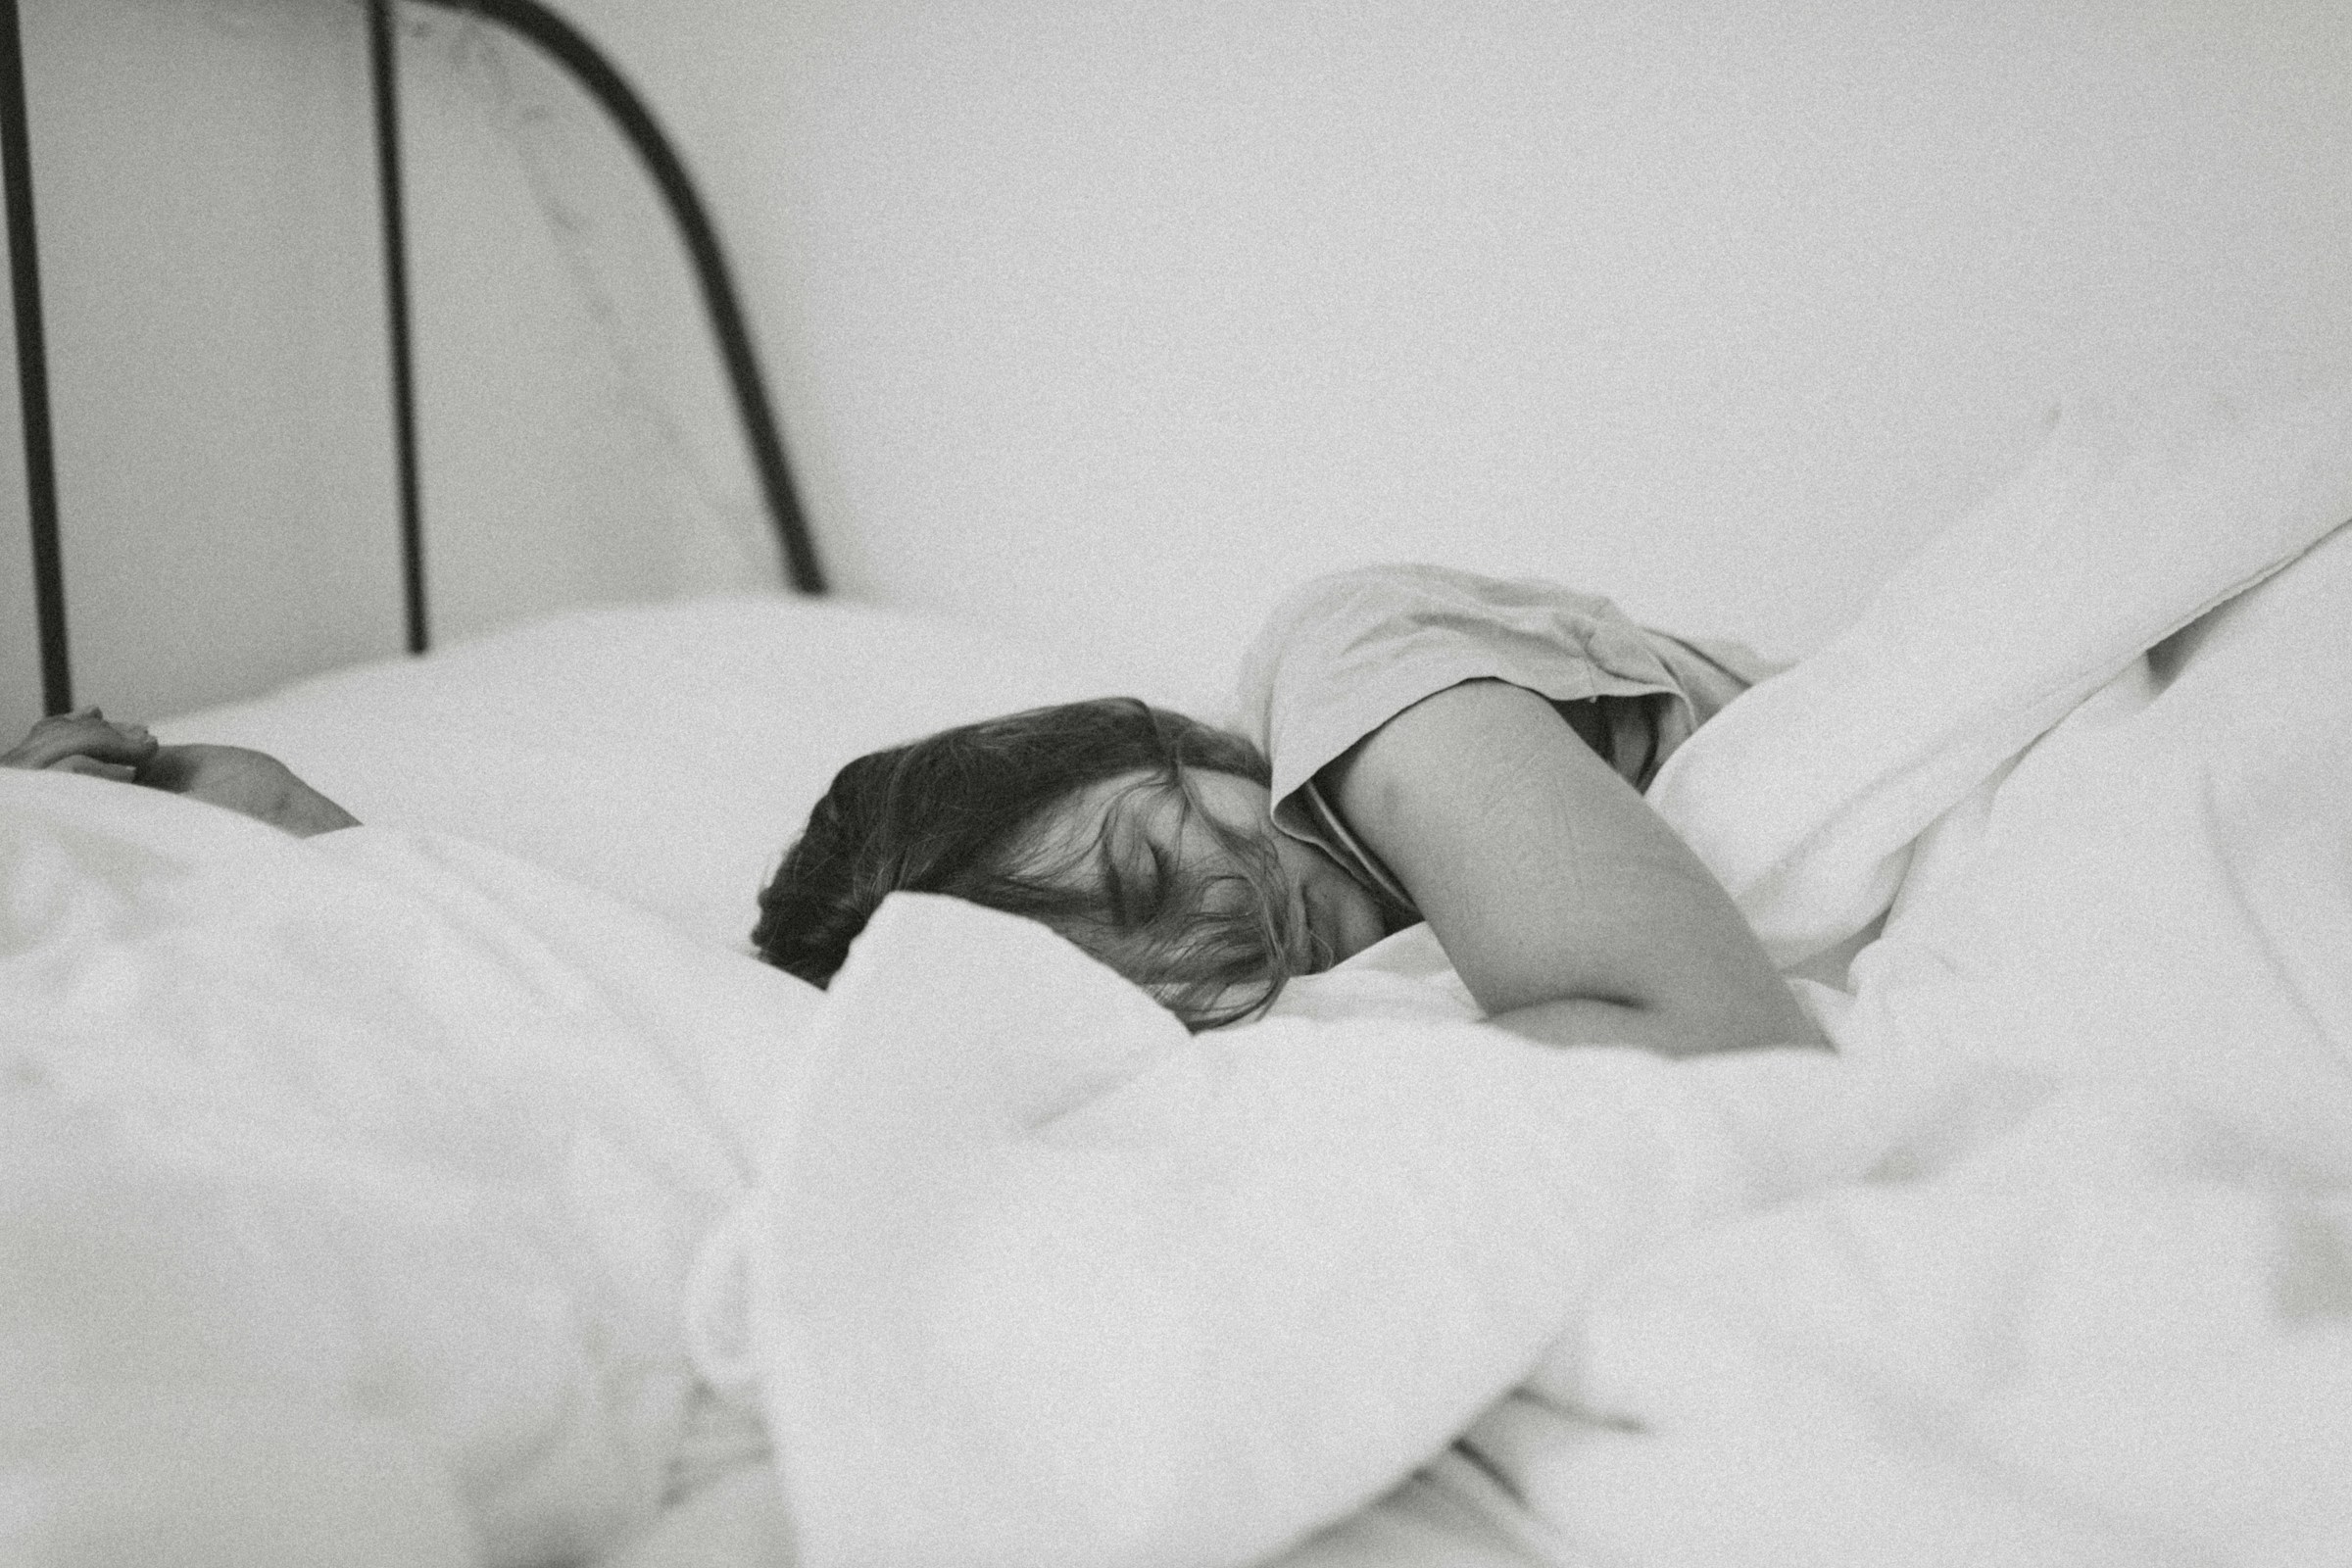 A woman sleeping in bed | Source: Unsplash